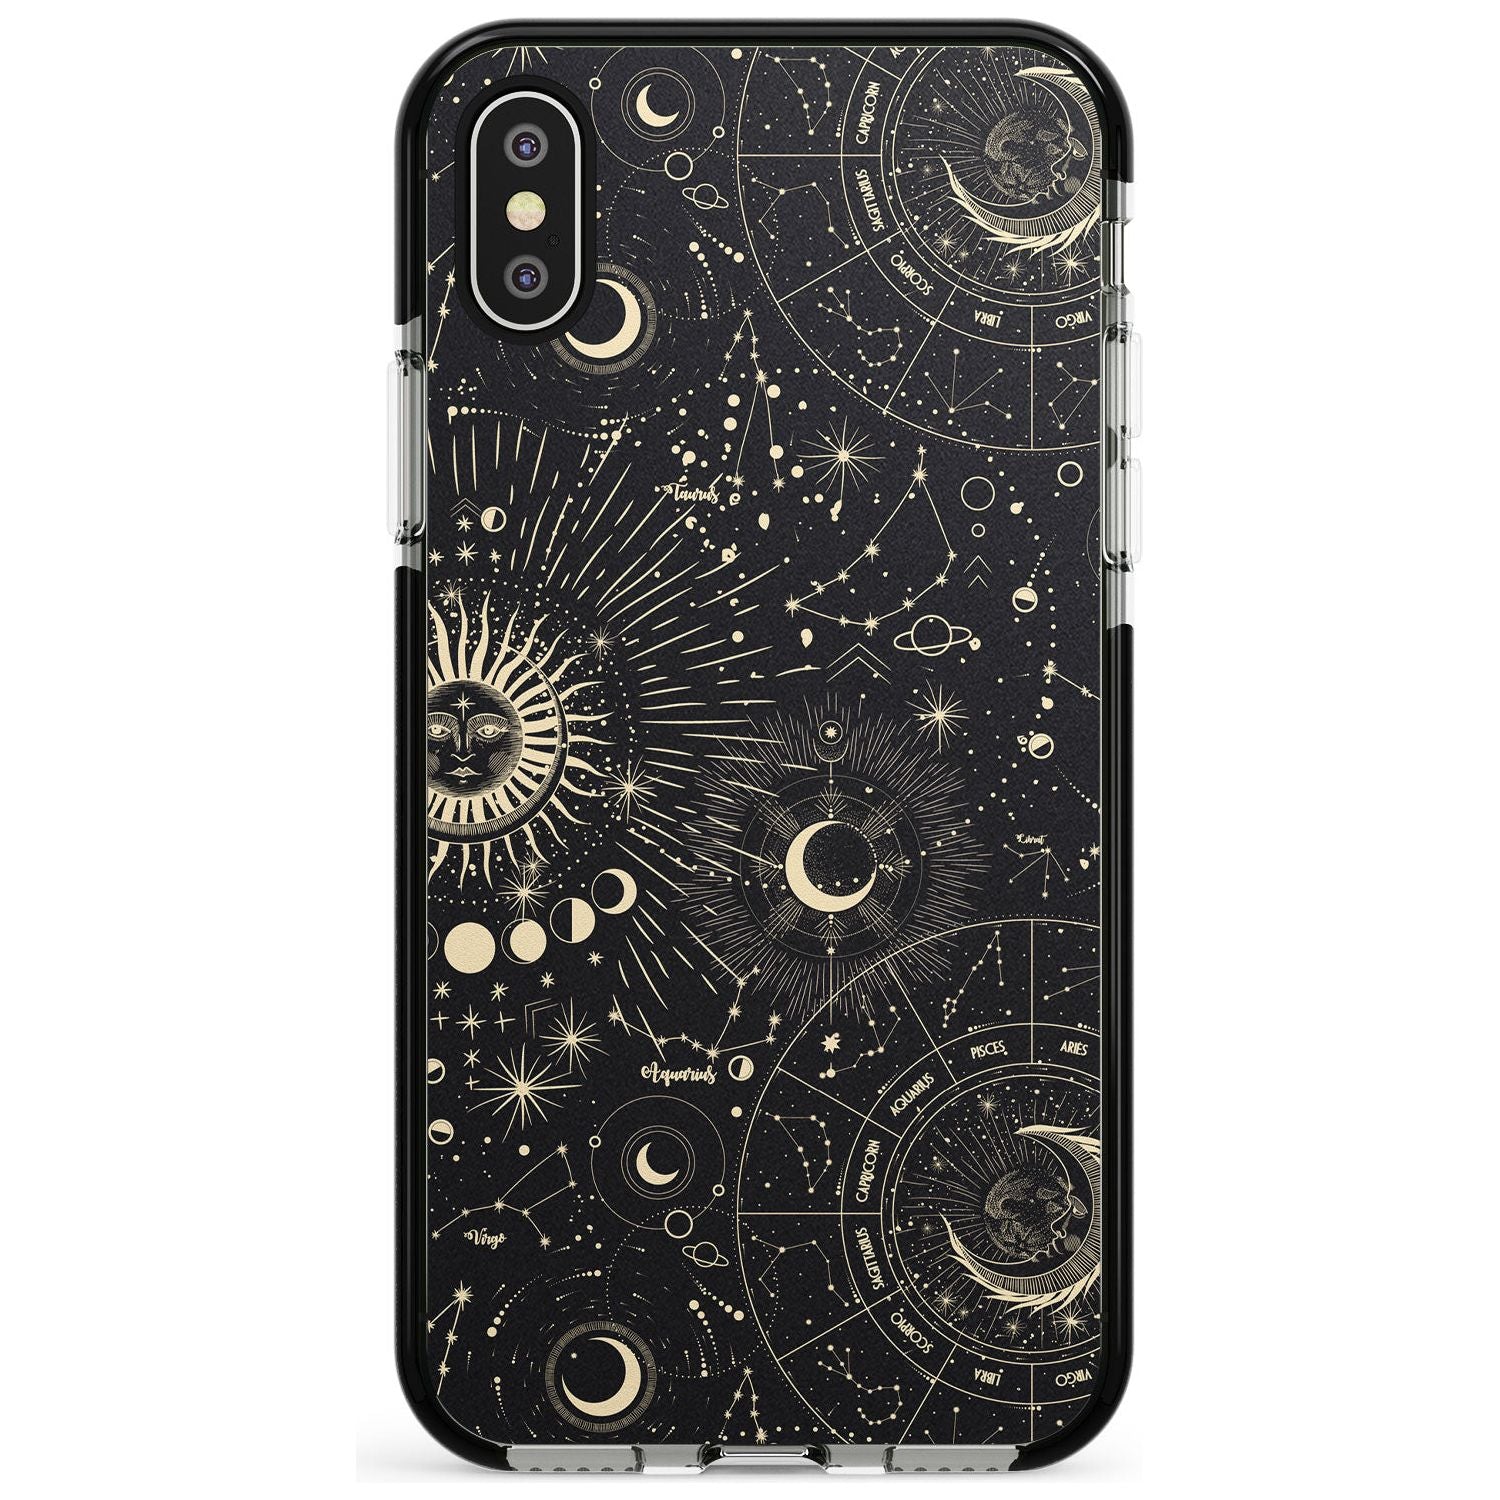 Suns & Zodiac Charts Pink Fade Impact Phone Case for iPhone X XS Max XR